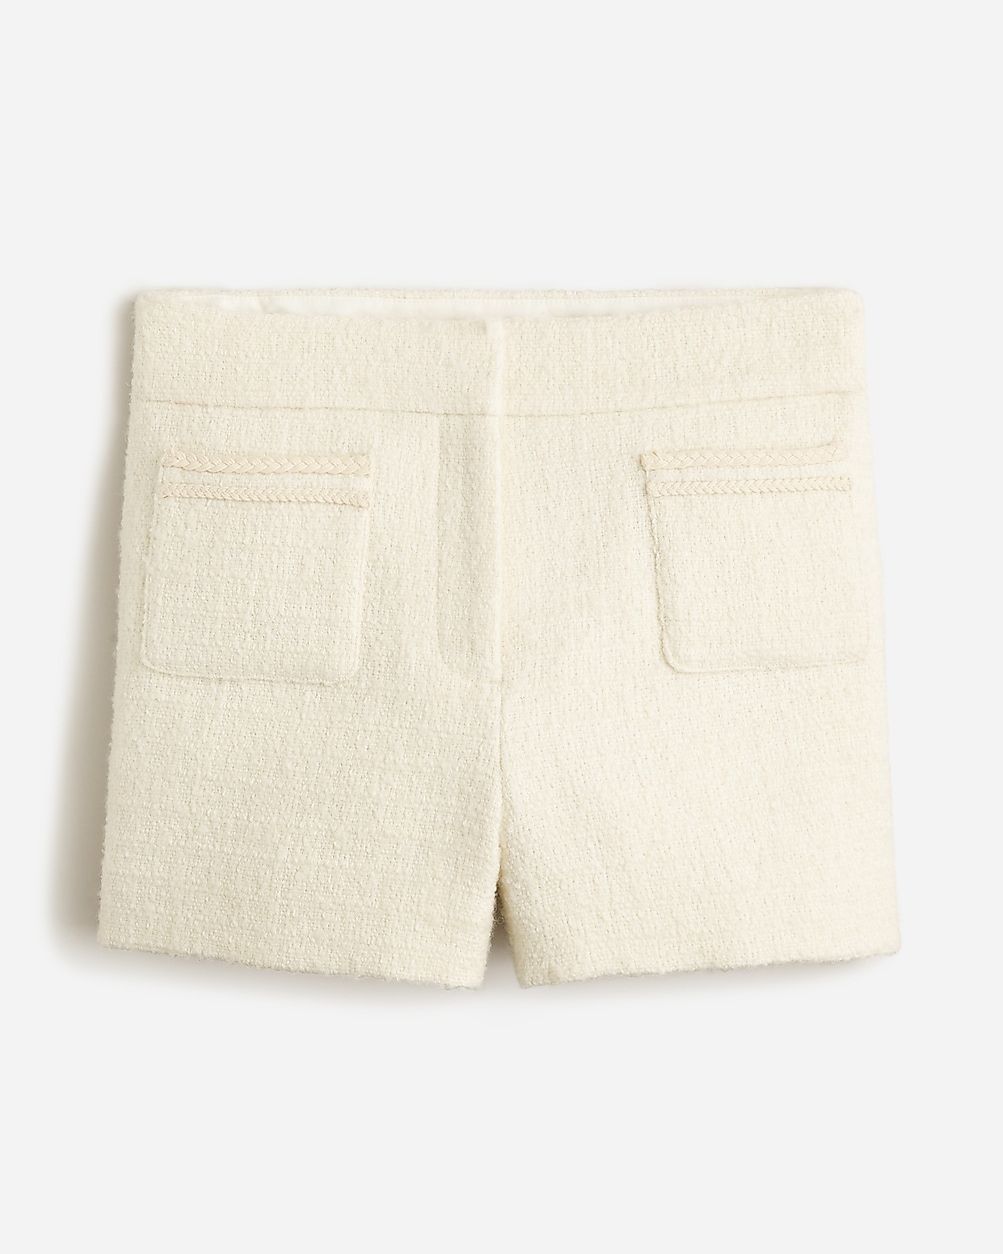 Limited-edition patch-pocket suit short in tweed | J.Crew US